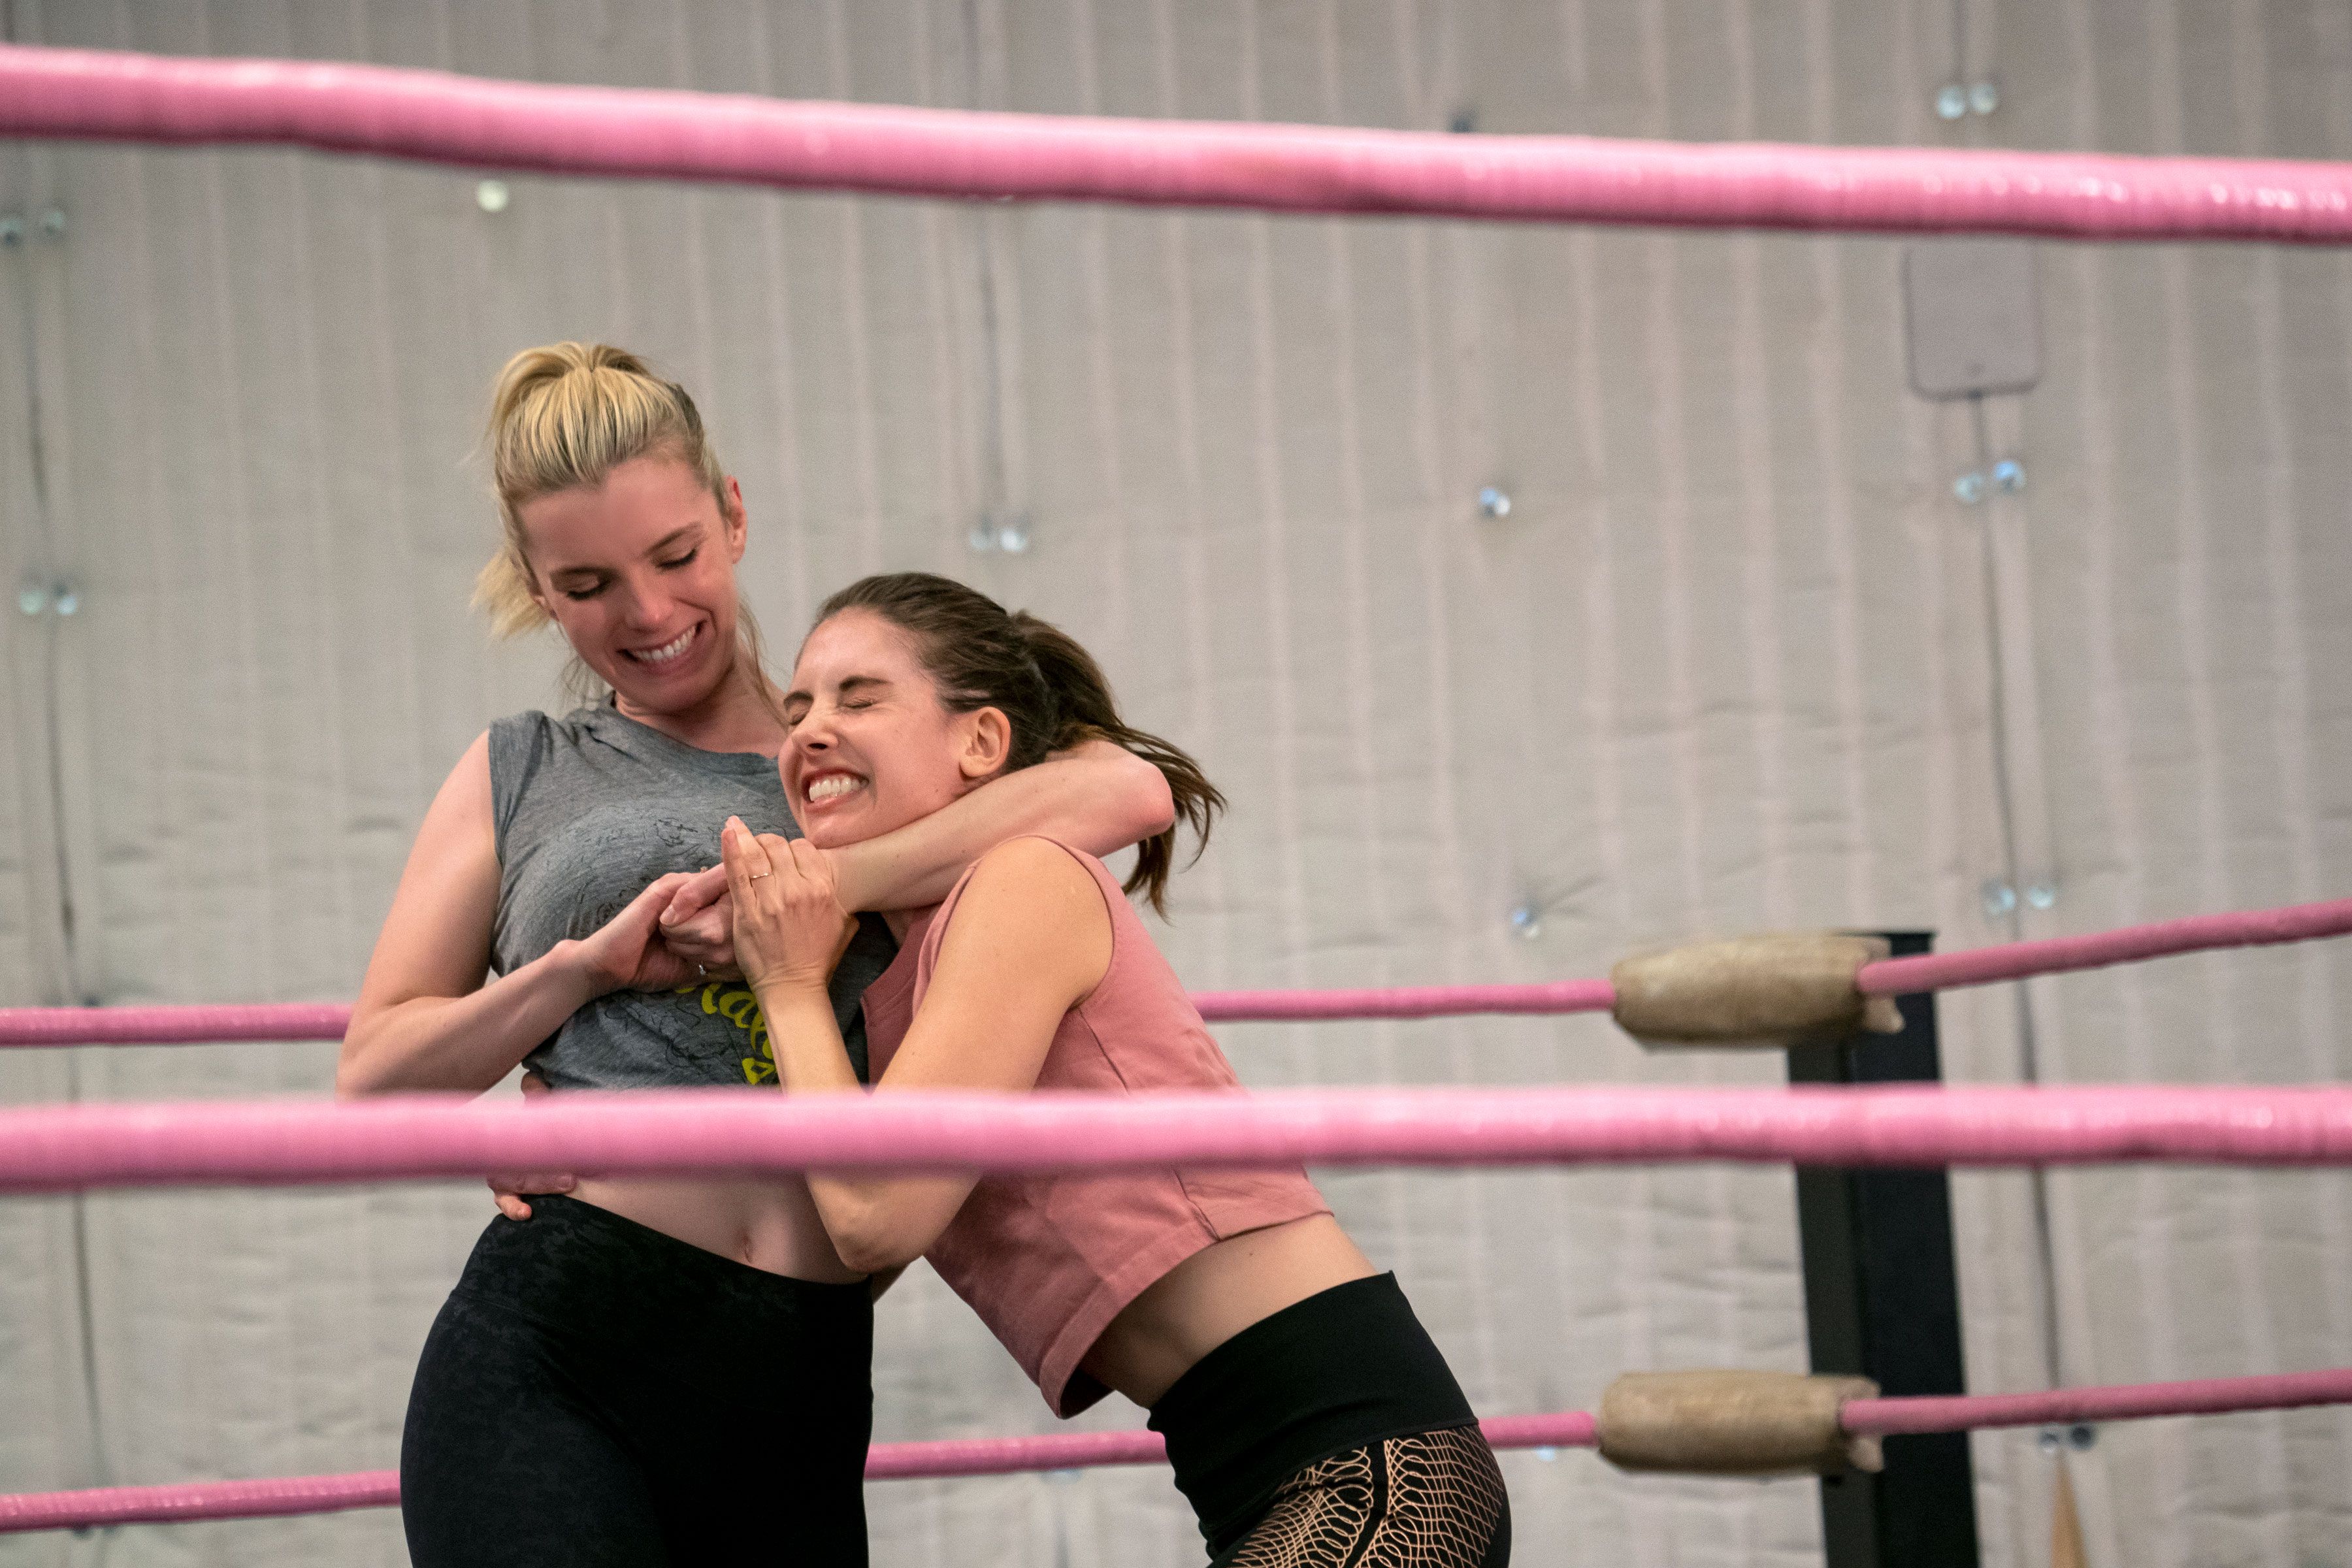 Betty Gilpin and Alison Brie Behind the Scenes of GLOW